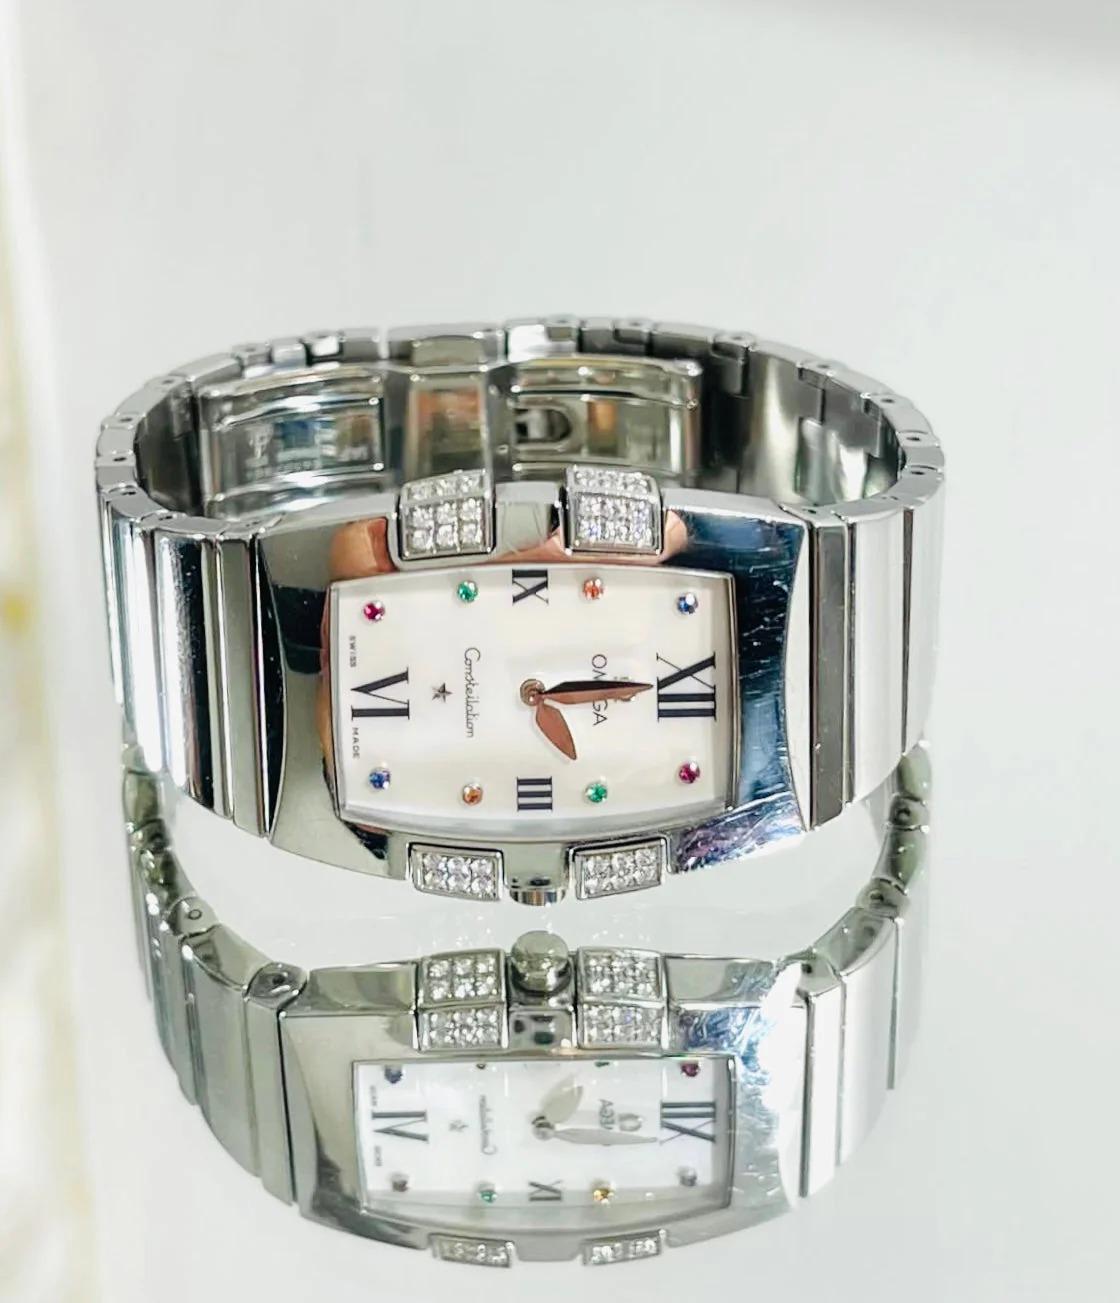 Omega Quadrella Constellation Mother Of Pearl & Diamond Watch

The Constellation Quadrella model accentuates its Constellation heritage with 48 brilliant white diamond claws. Roman numerals to the white mother of pearl face and having 2 rubies, 2